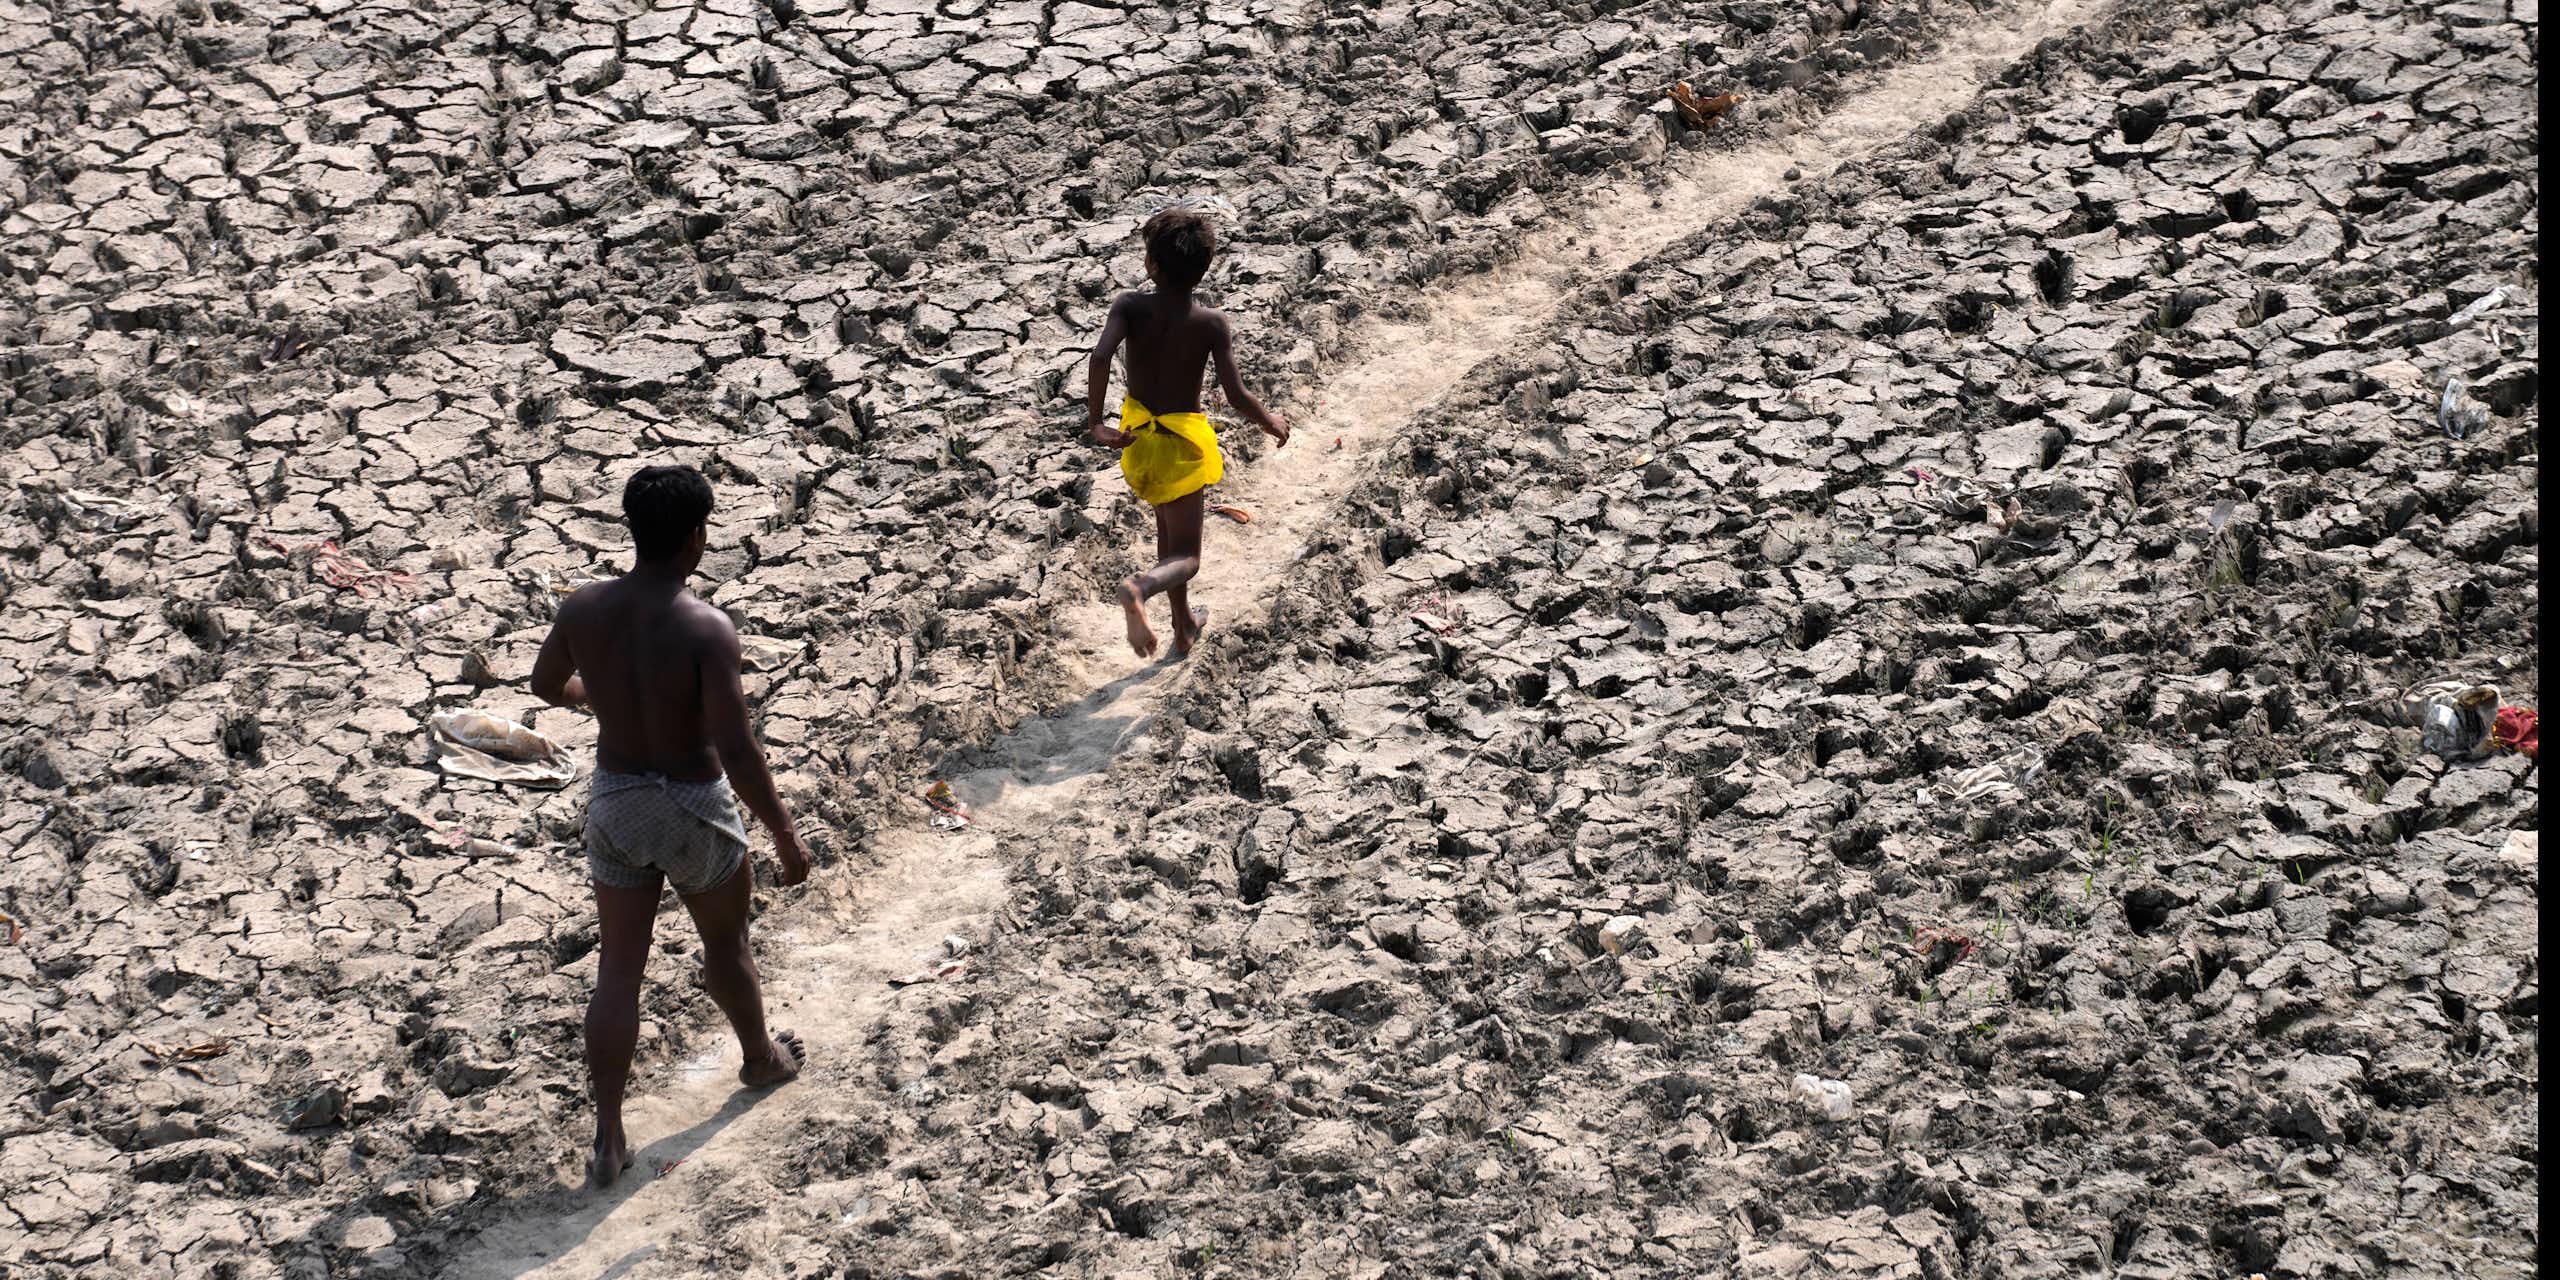 A man and a boy walk along a dried river bed.